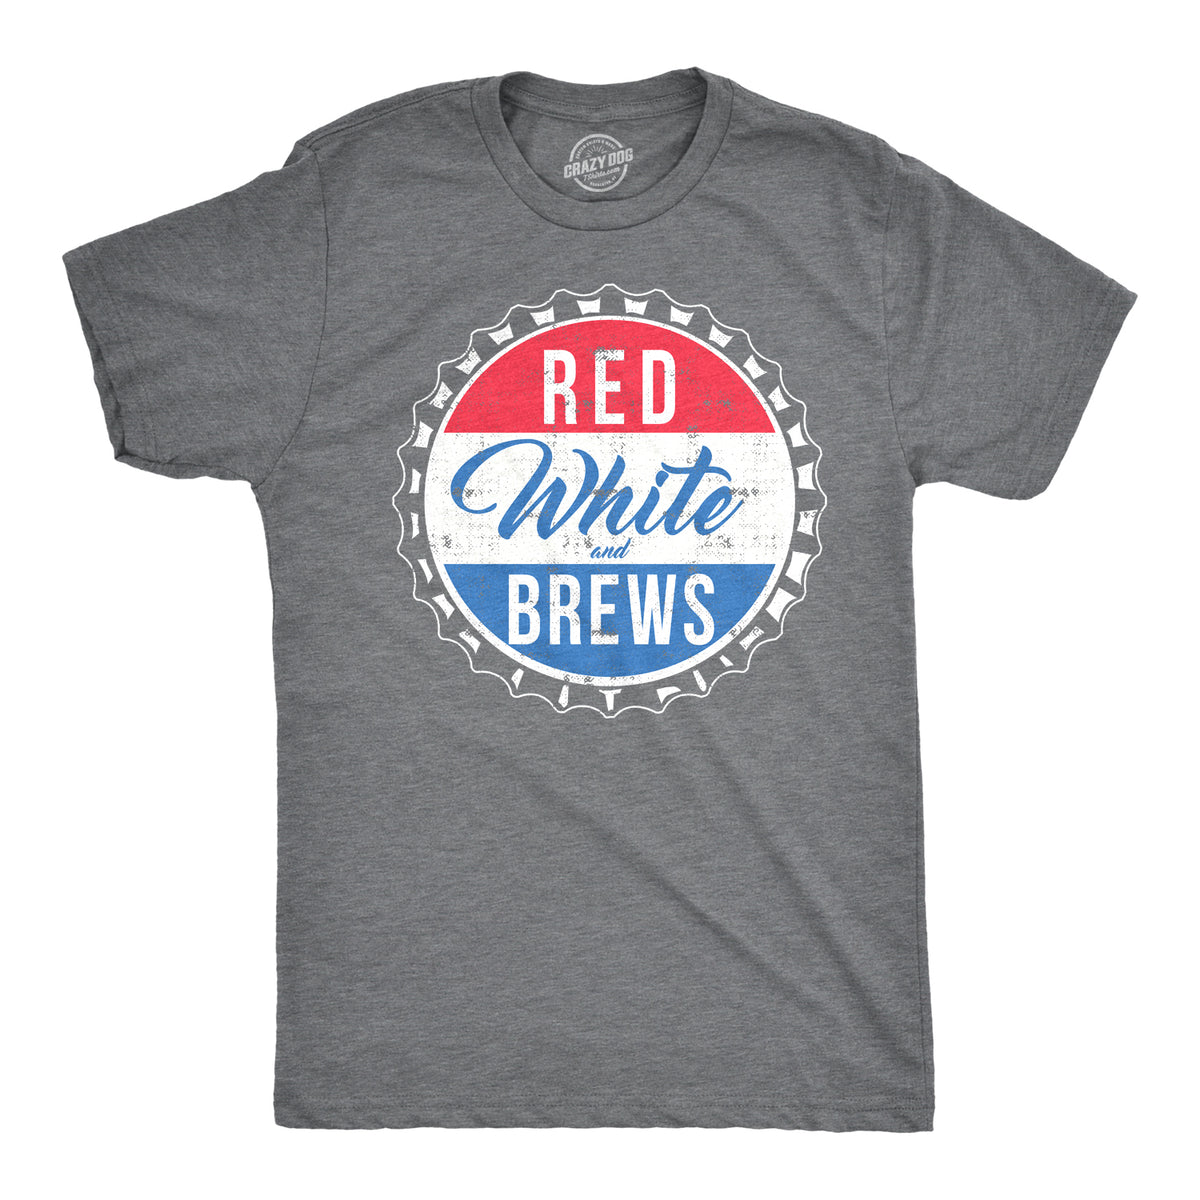 Funny Dark Heather Grey Red White and Brews Mens T Shirt Nerdy Fourth of July Beer Drinking Retro Tee